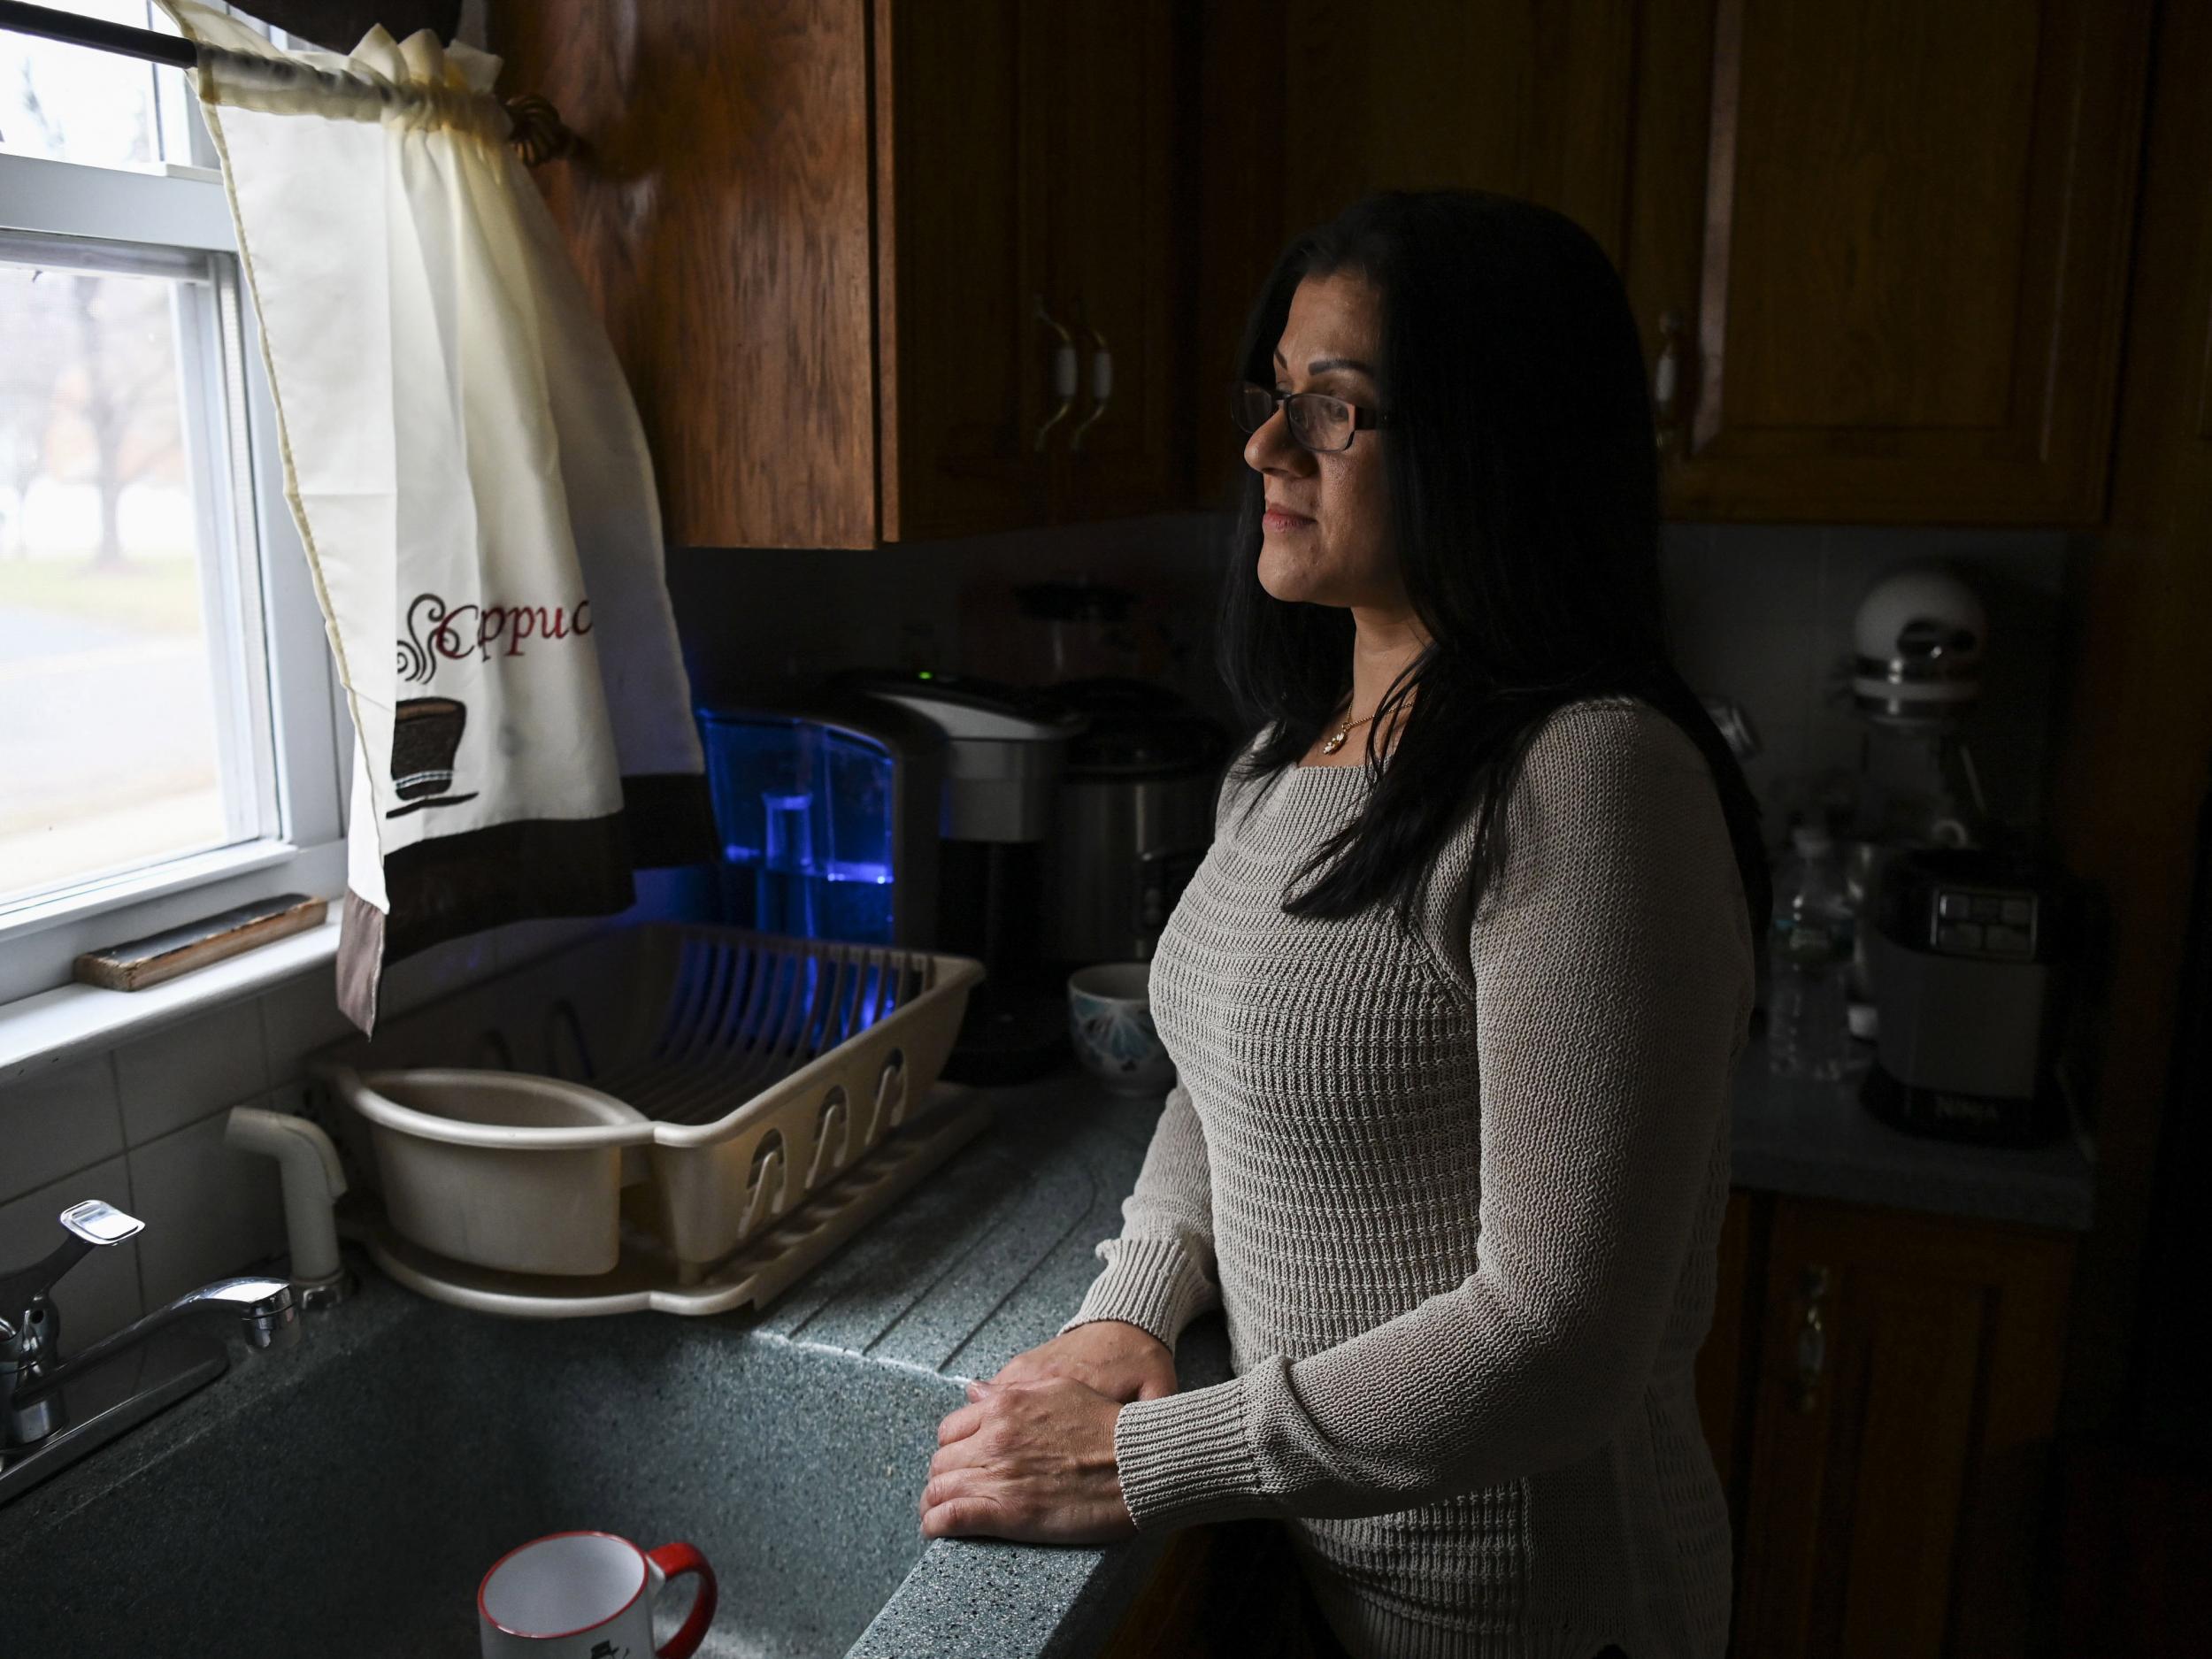 Sandra Diaz, a former employee of the Trump National Golf Club Bedminster and an undocumented migrant, at her home in Bound Brook, New Jersey